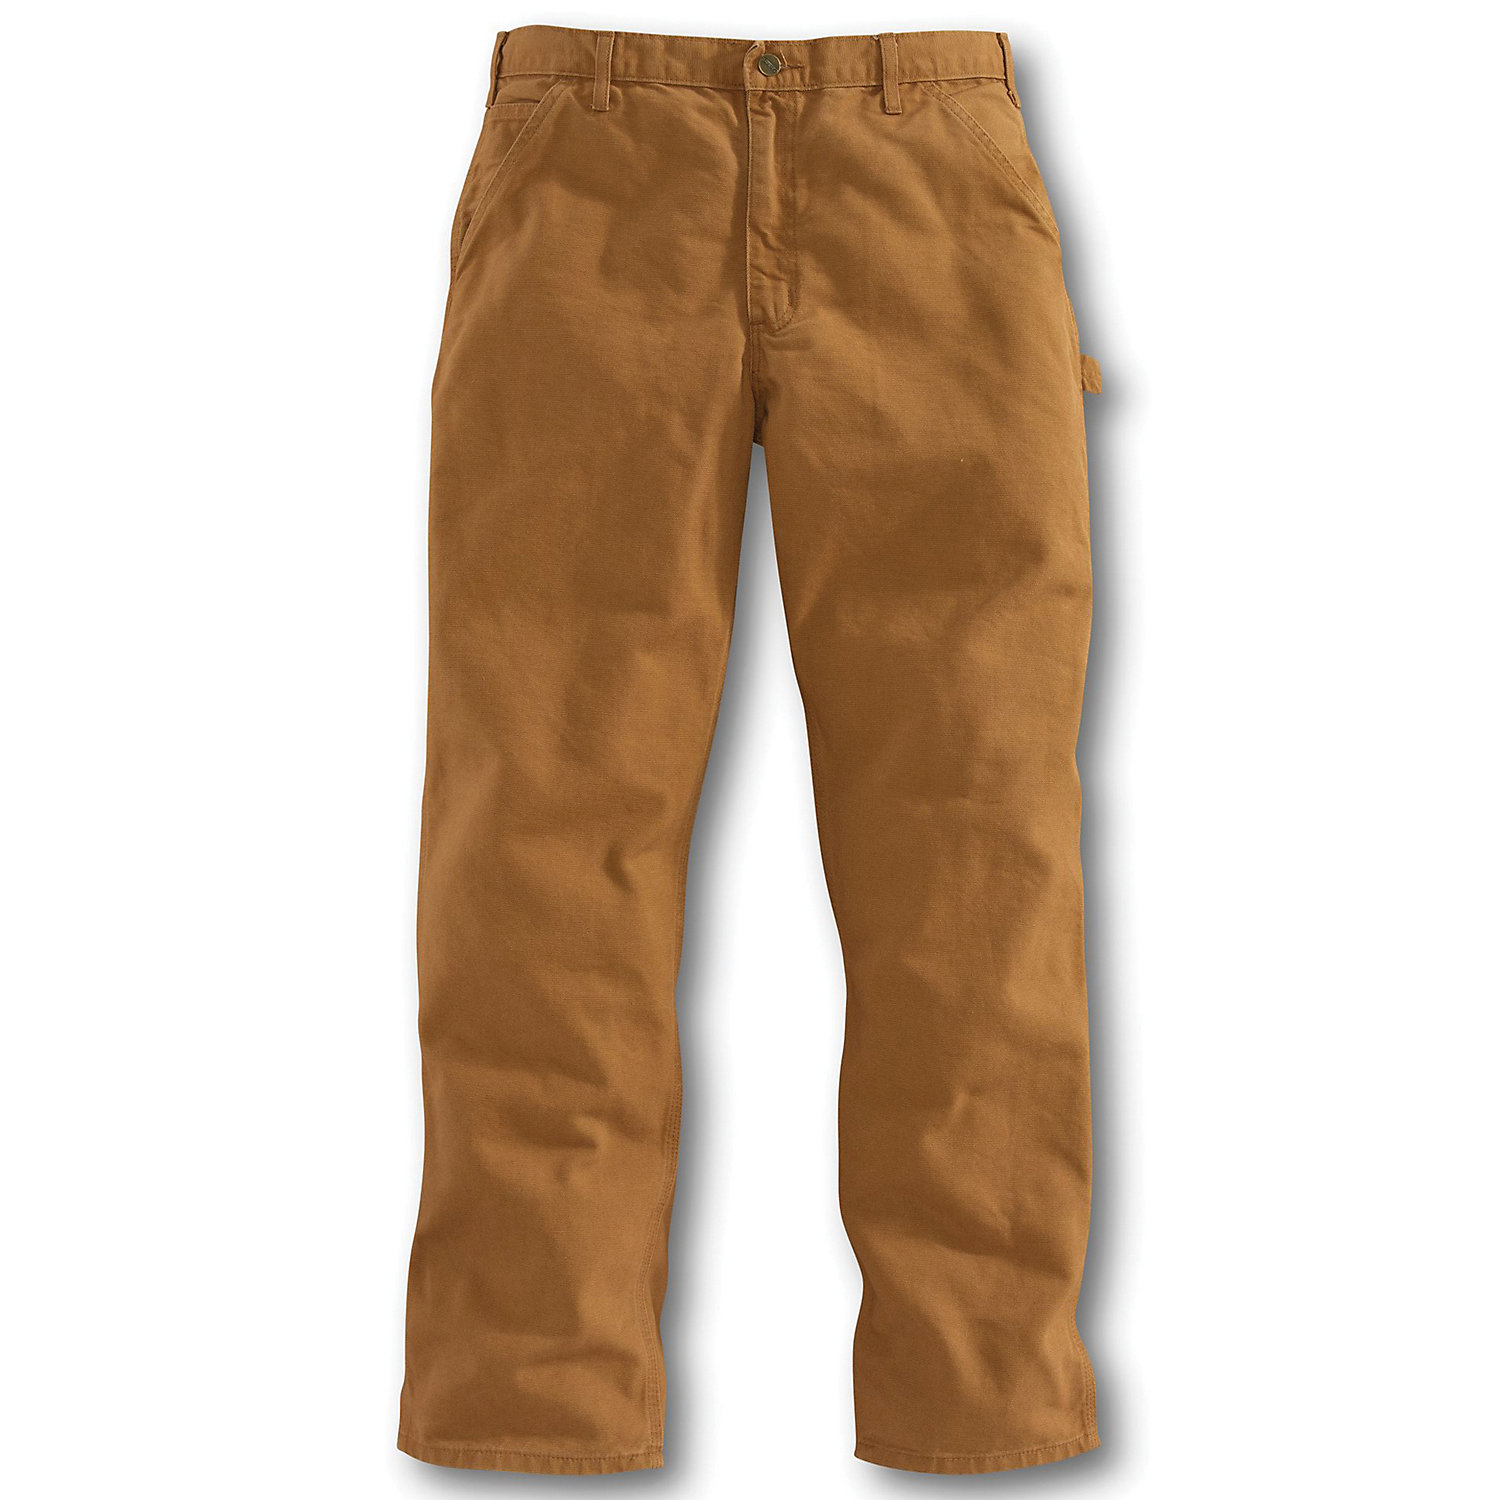 Carhartt Men's Washed Duck Work Dungaree Pant 